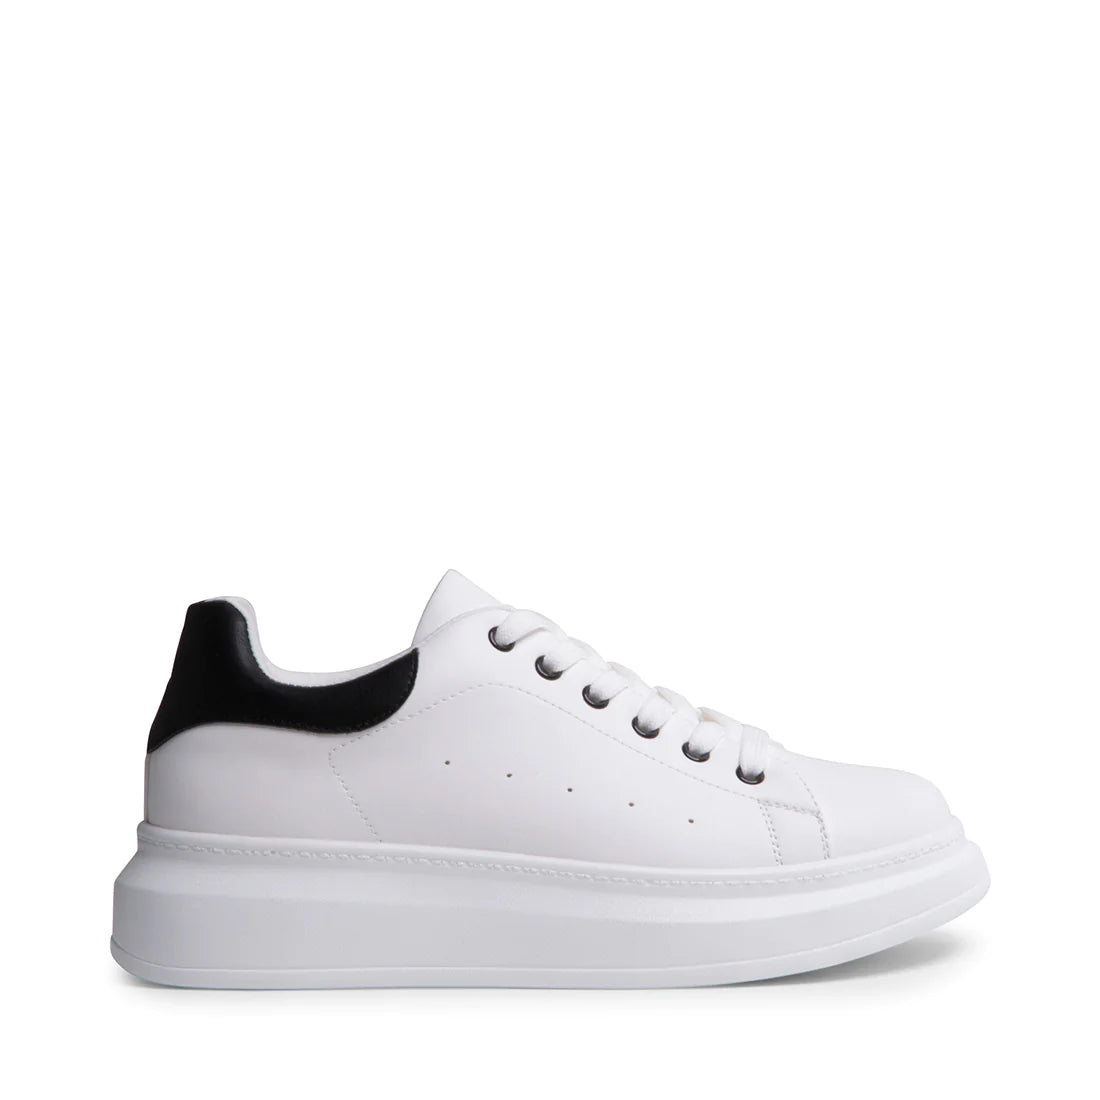 Steve Madden India - It's okay to be obsessed with White Sneakers! Evolve  your casual look into something special with ESCALA. https://bit.ly/3dEUksu  #SteveMaddenIndia #SteveMadden #Sneakers #Obssesed #FuturisticKicks |  Facebook